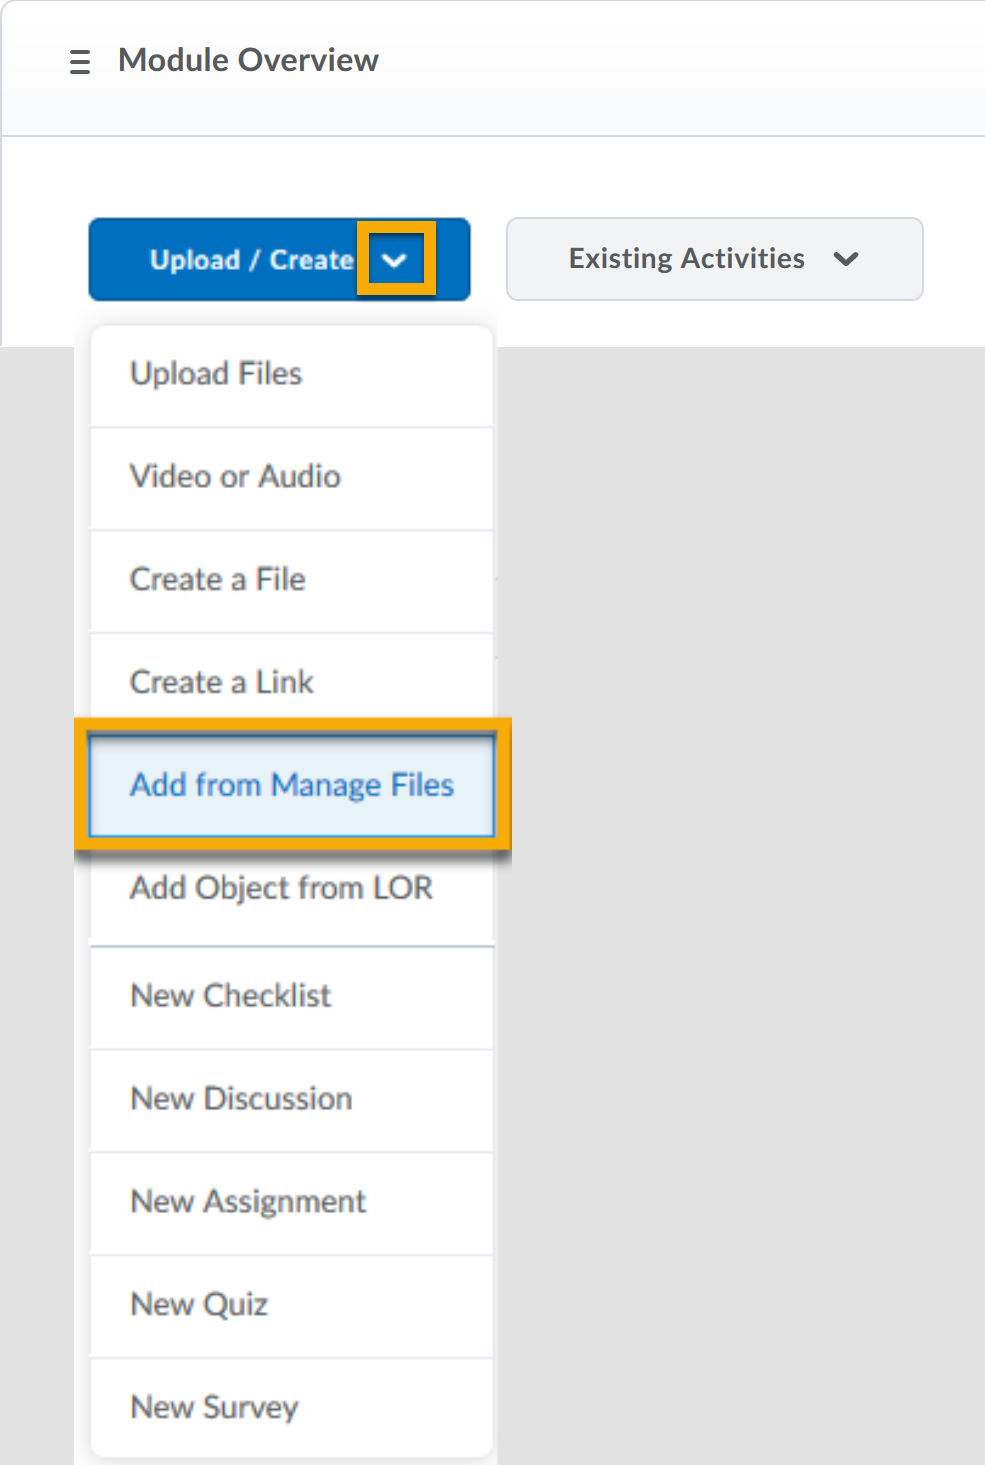 Upload/Create menu expanded to display the Add from Manage Files option. 